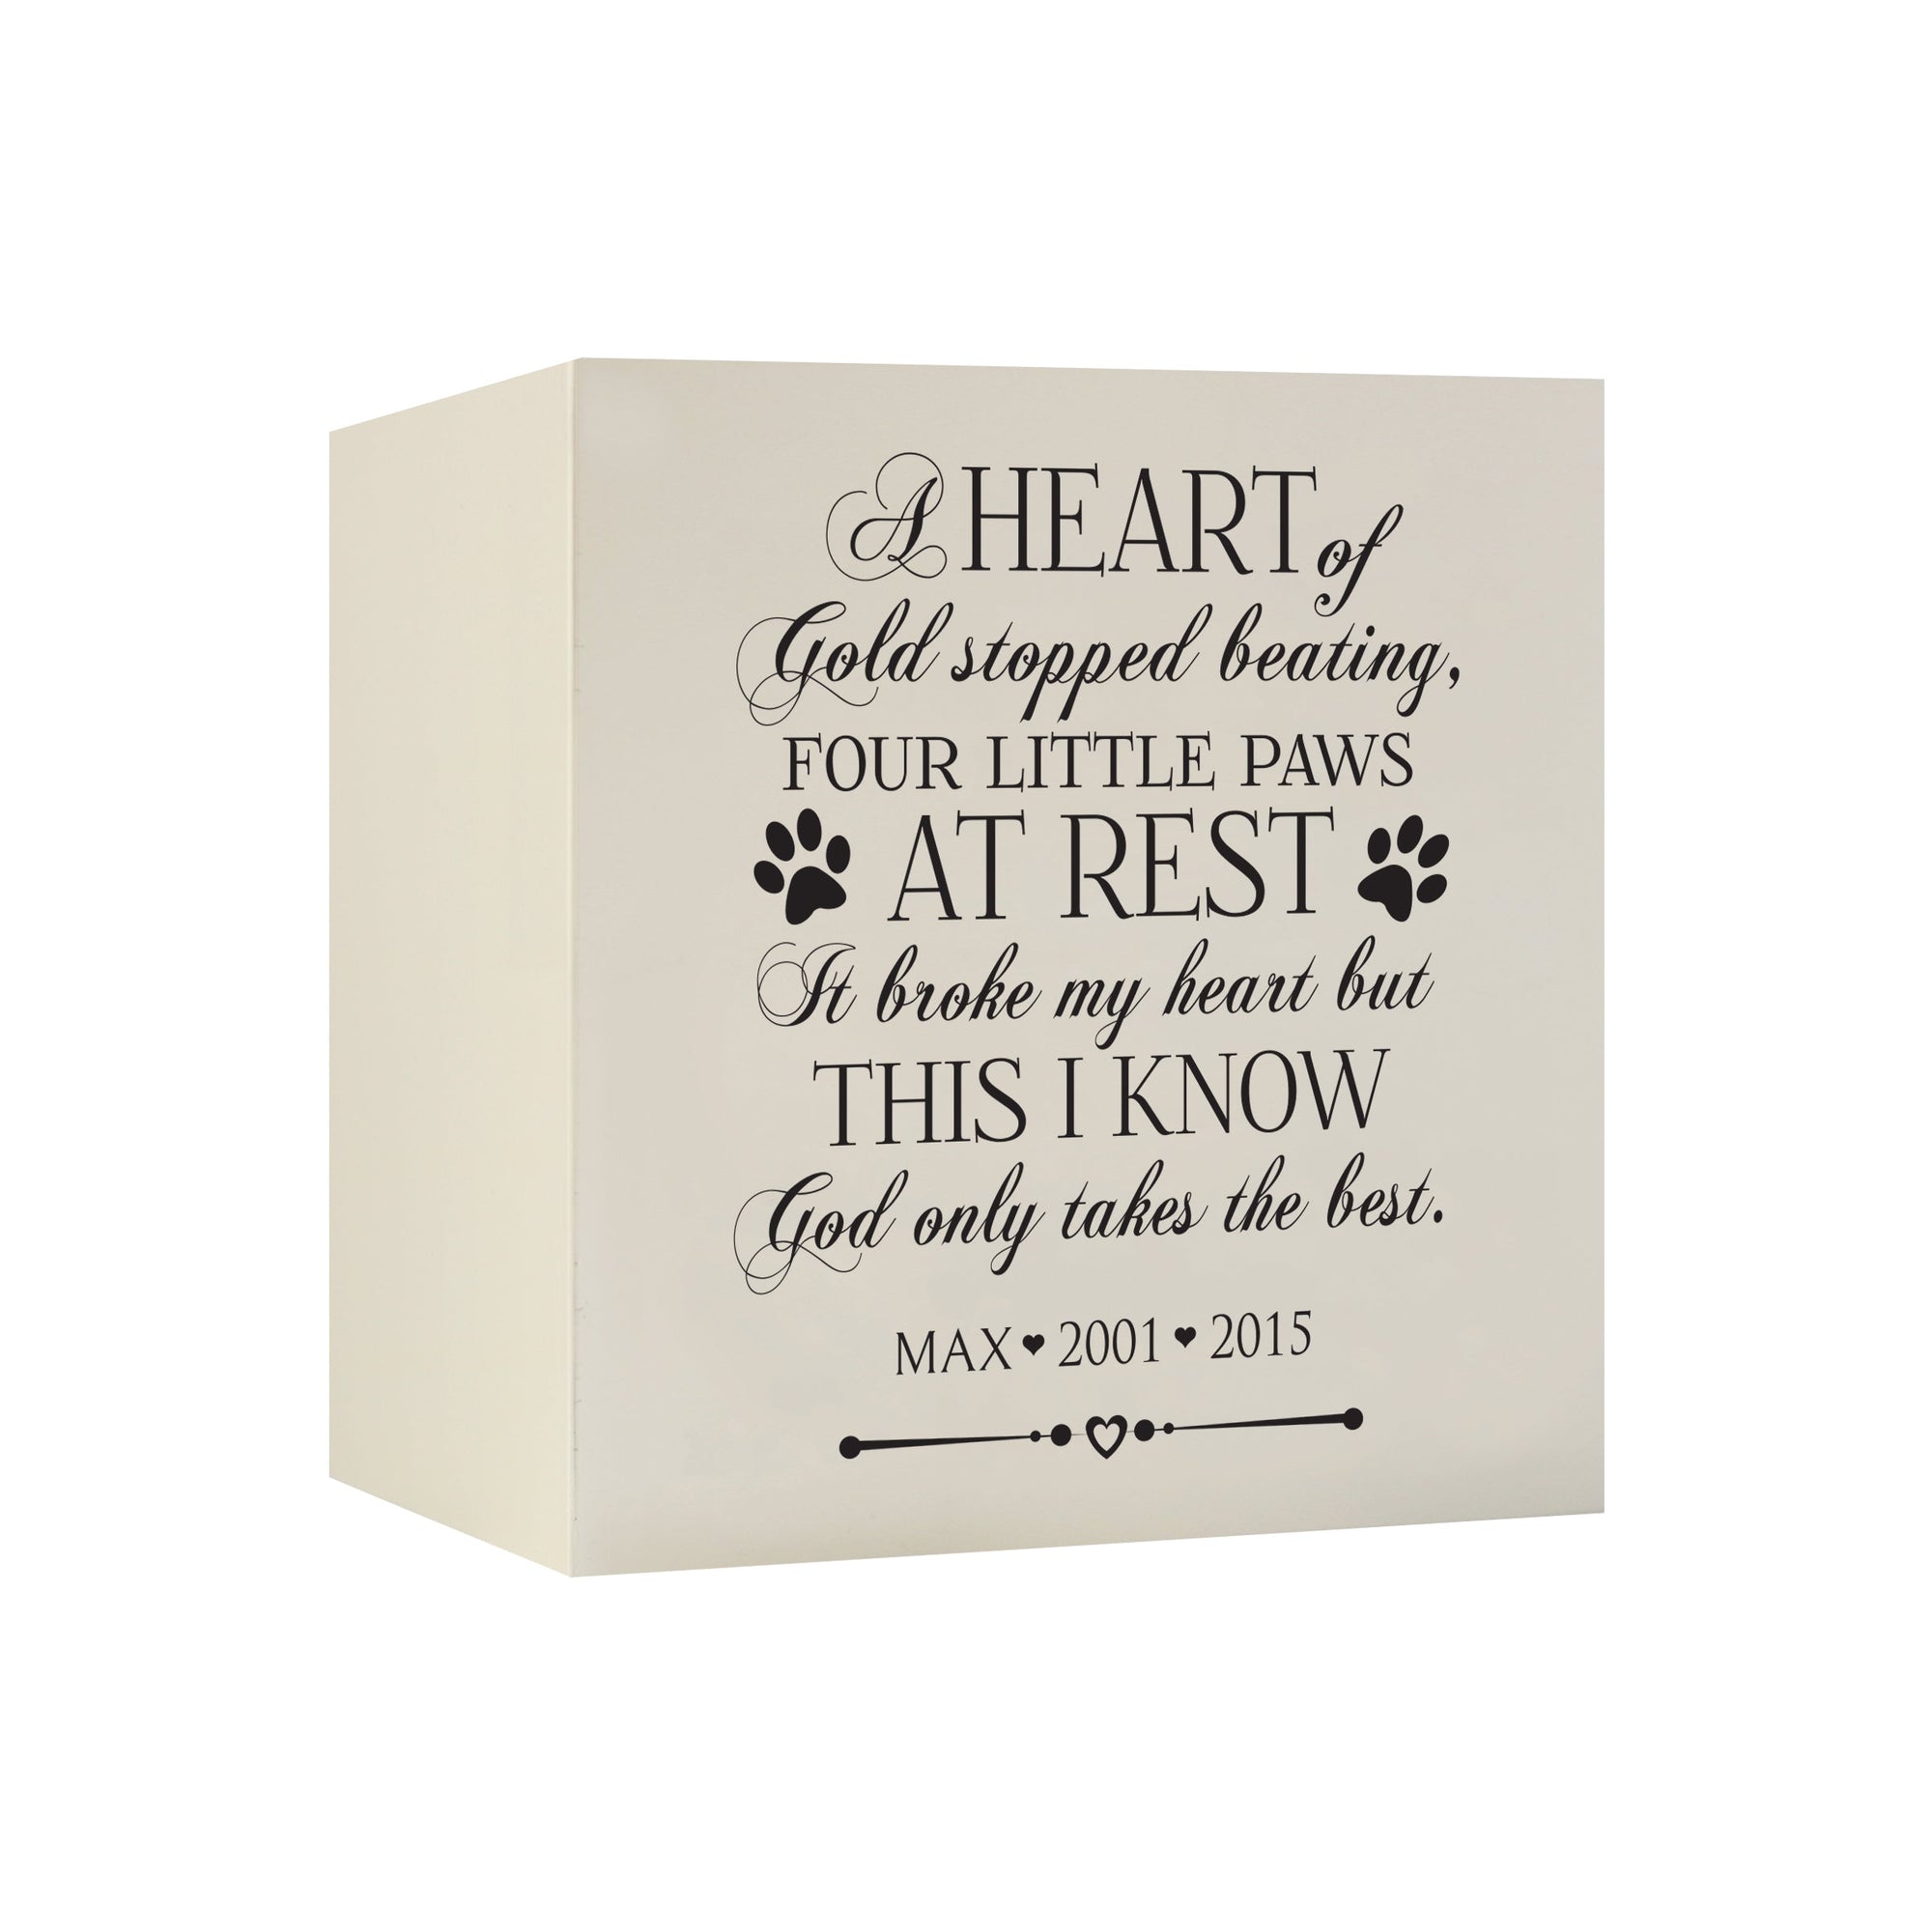 Pet Memorial Shadow Box Cremation Urn for Dog or Cat - A Heart Of Gold